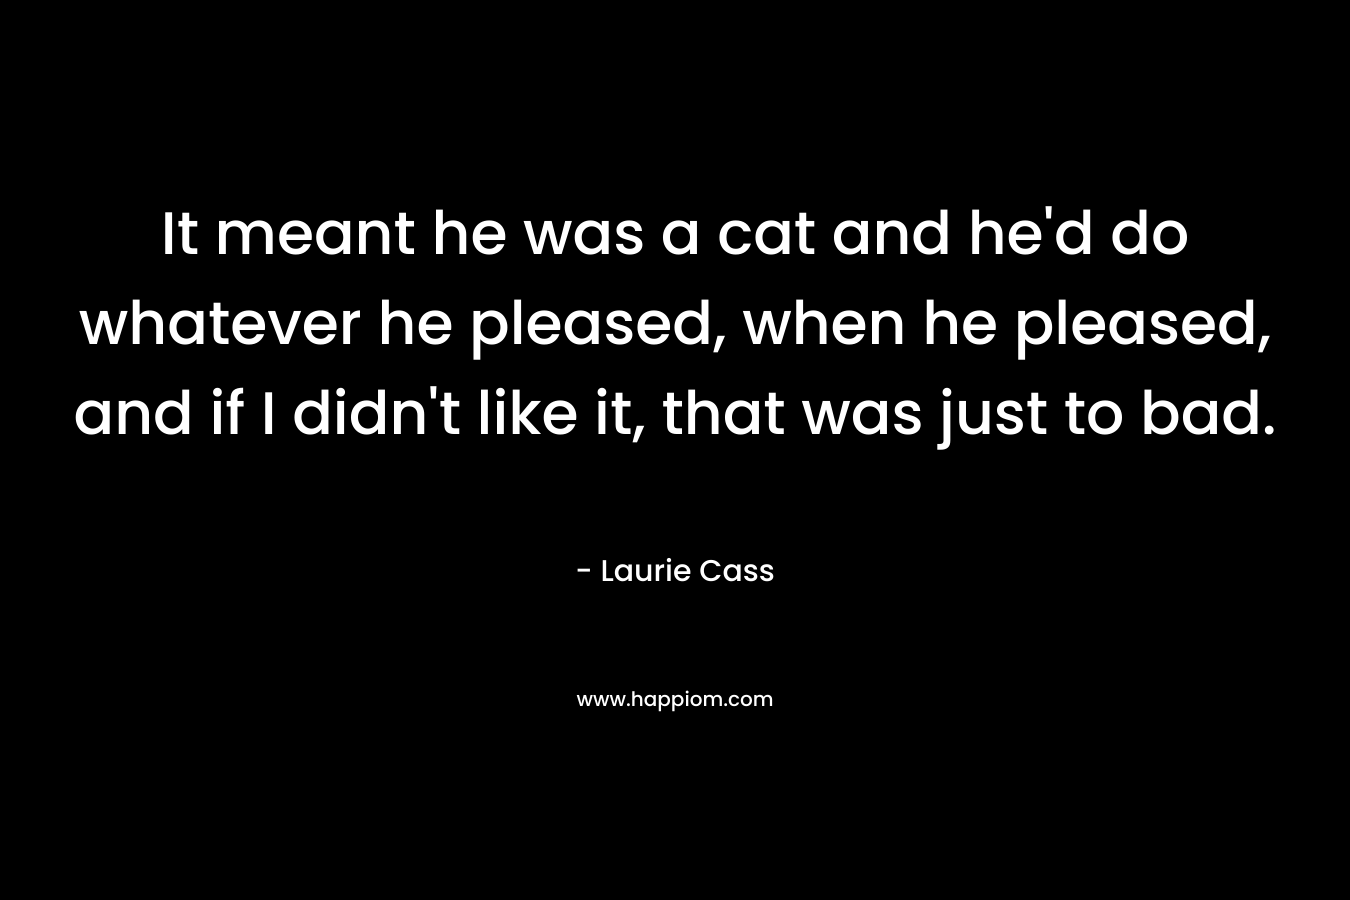 It meant he was a cat and he’d do whatever he pleased, when he pleased, and if I didn’t like it, that was just to bad. – Laurie Cass